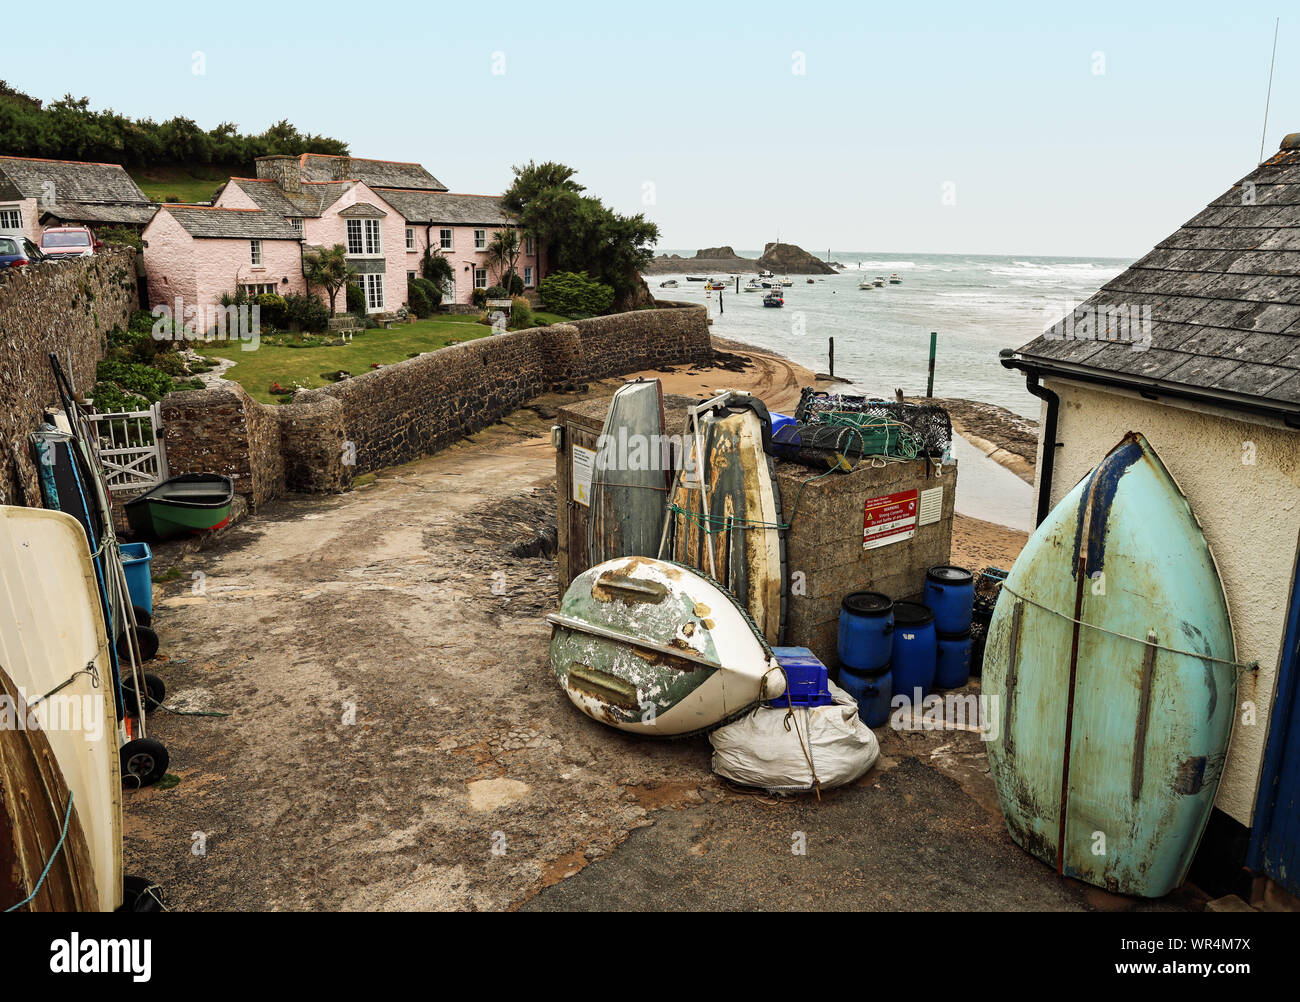 A house by the beach at Bude on north Cornwall’s Atlantic Coast, a resort popular with surfers and hikers. Stock Photo